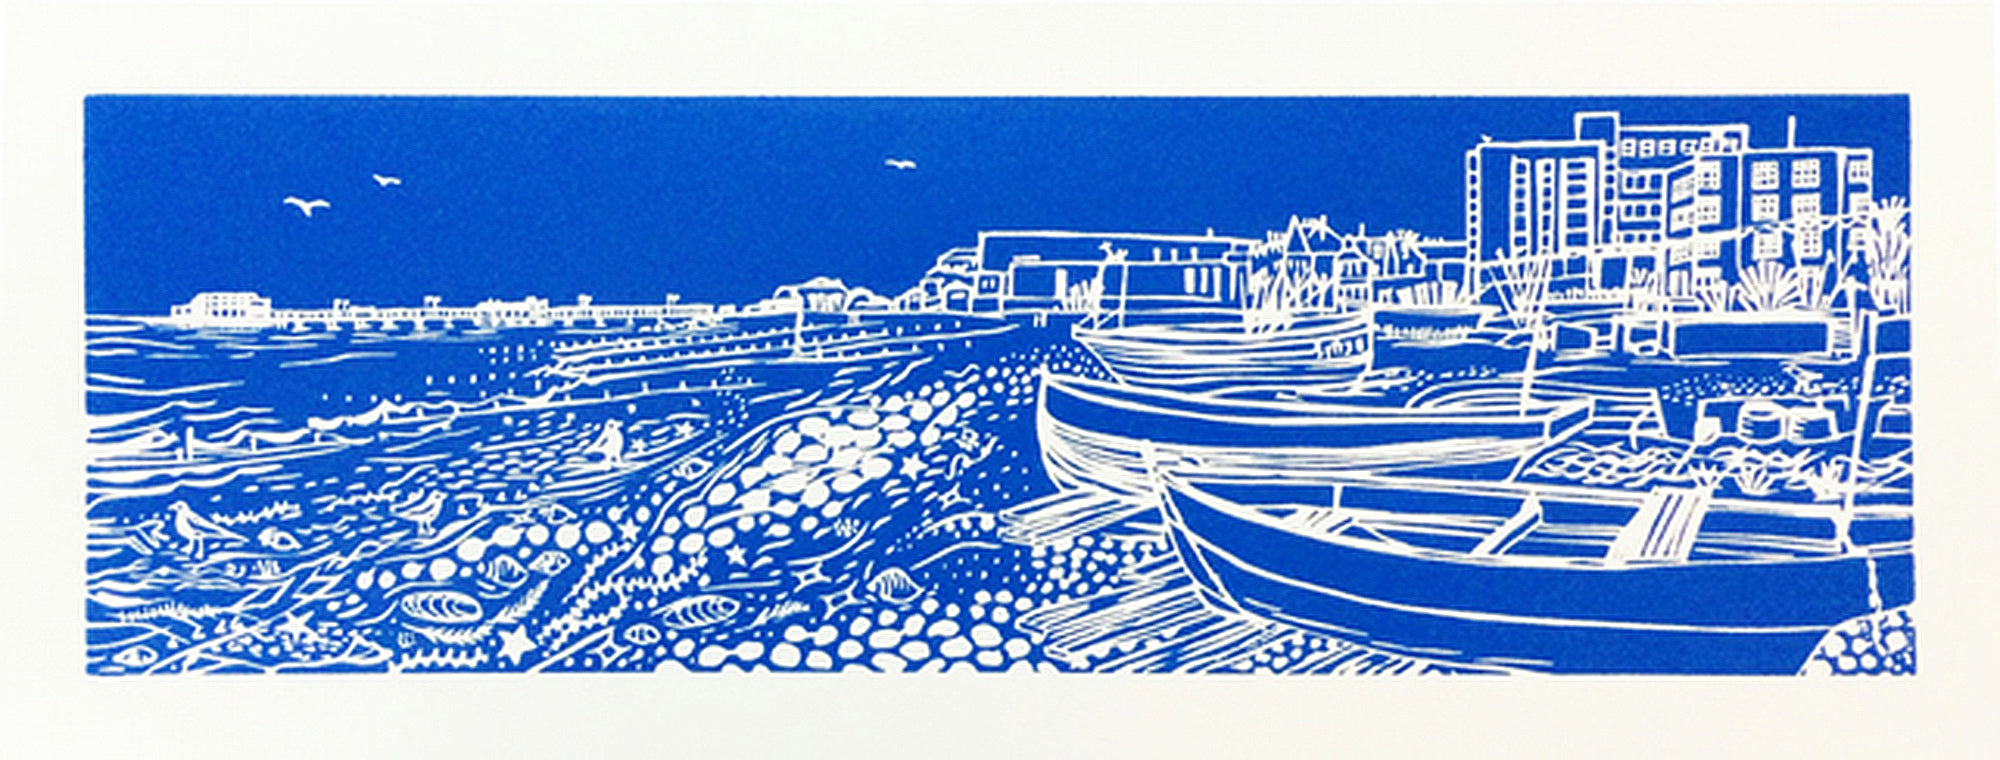 Worthing Beach and Fishing Boats greetings card